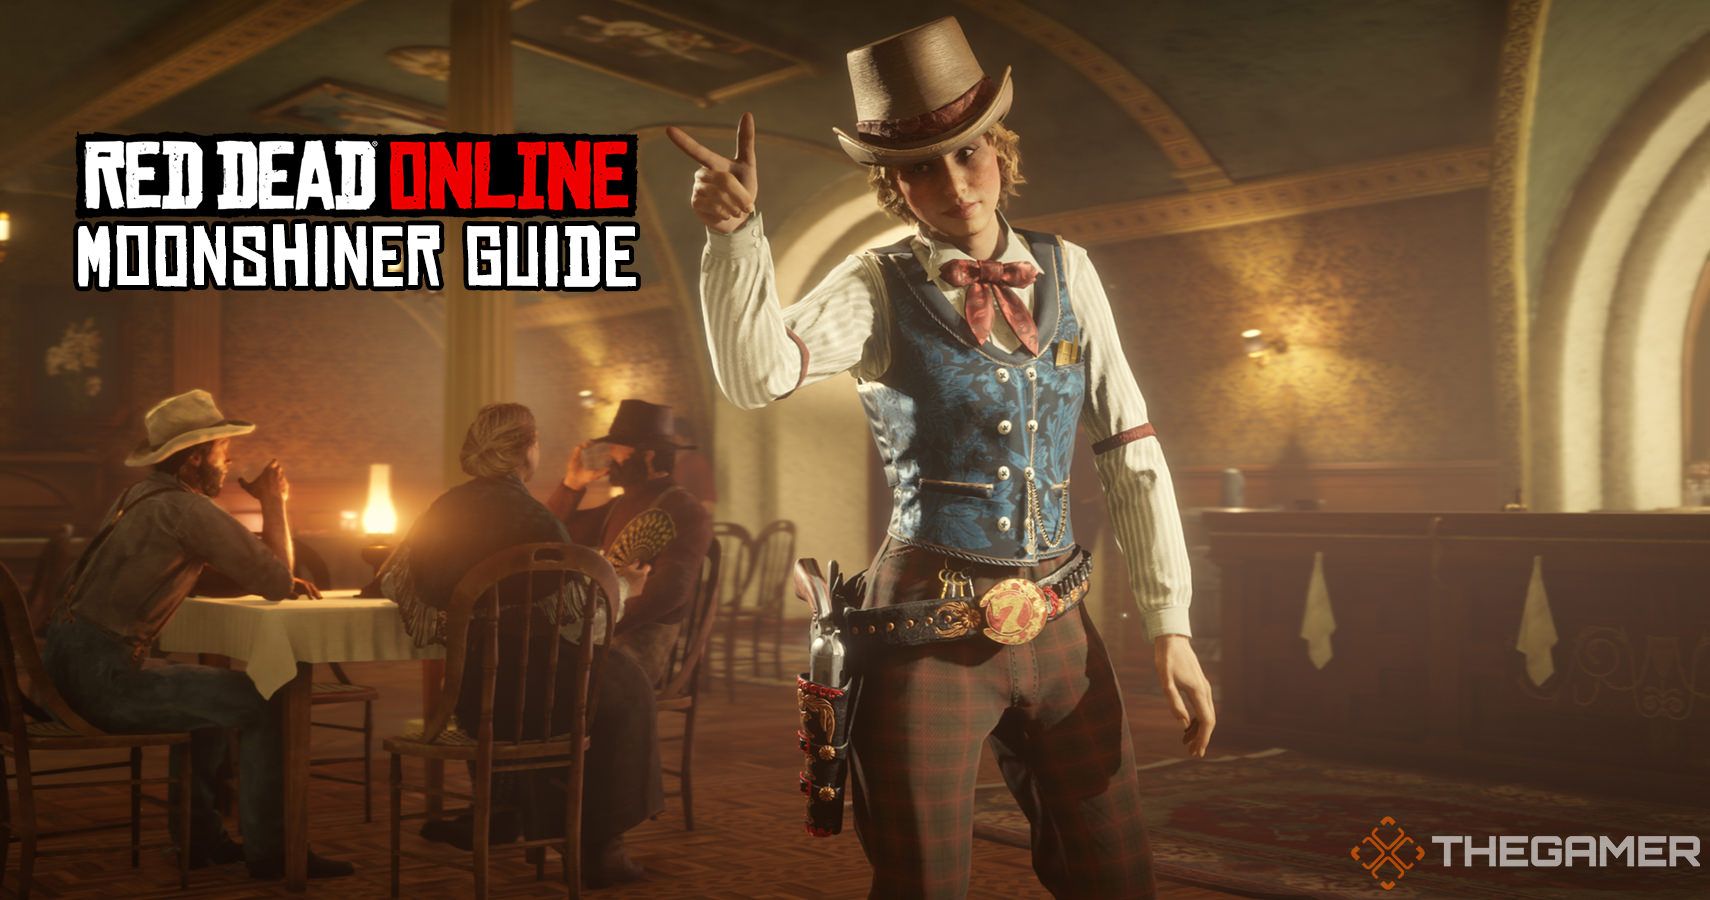 Red Dead Online Posses explained - how to make a Posse and join